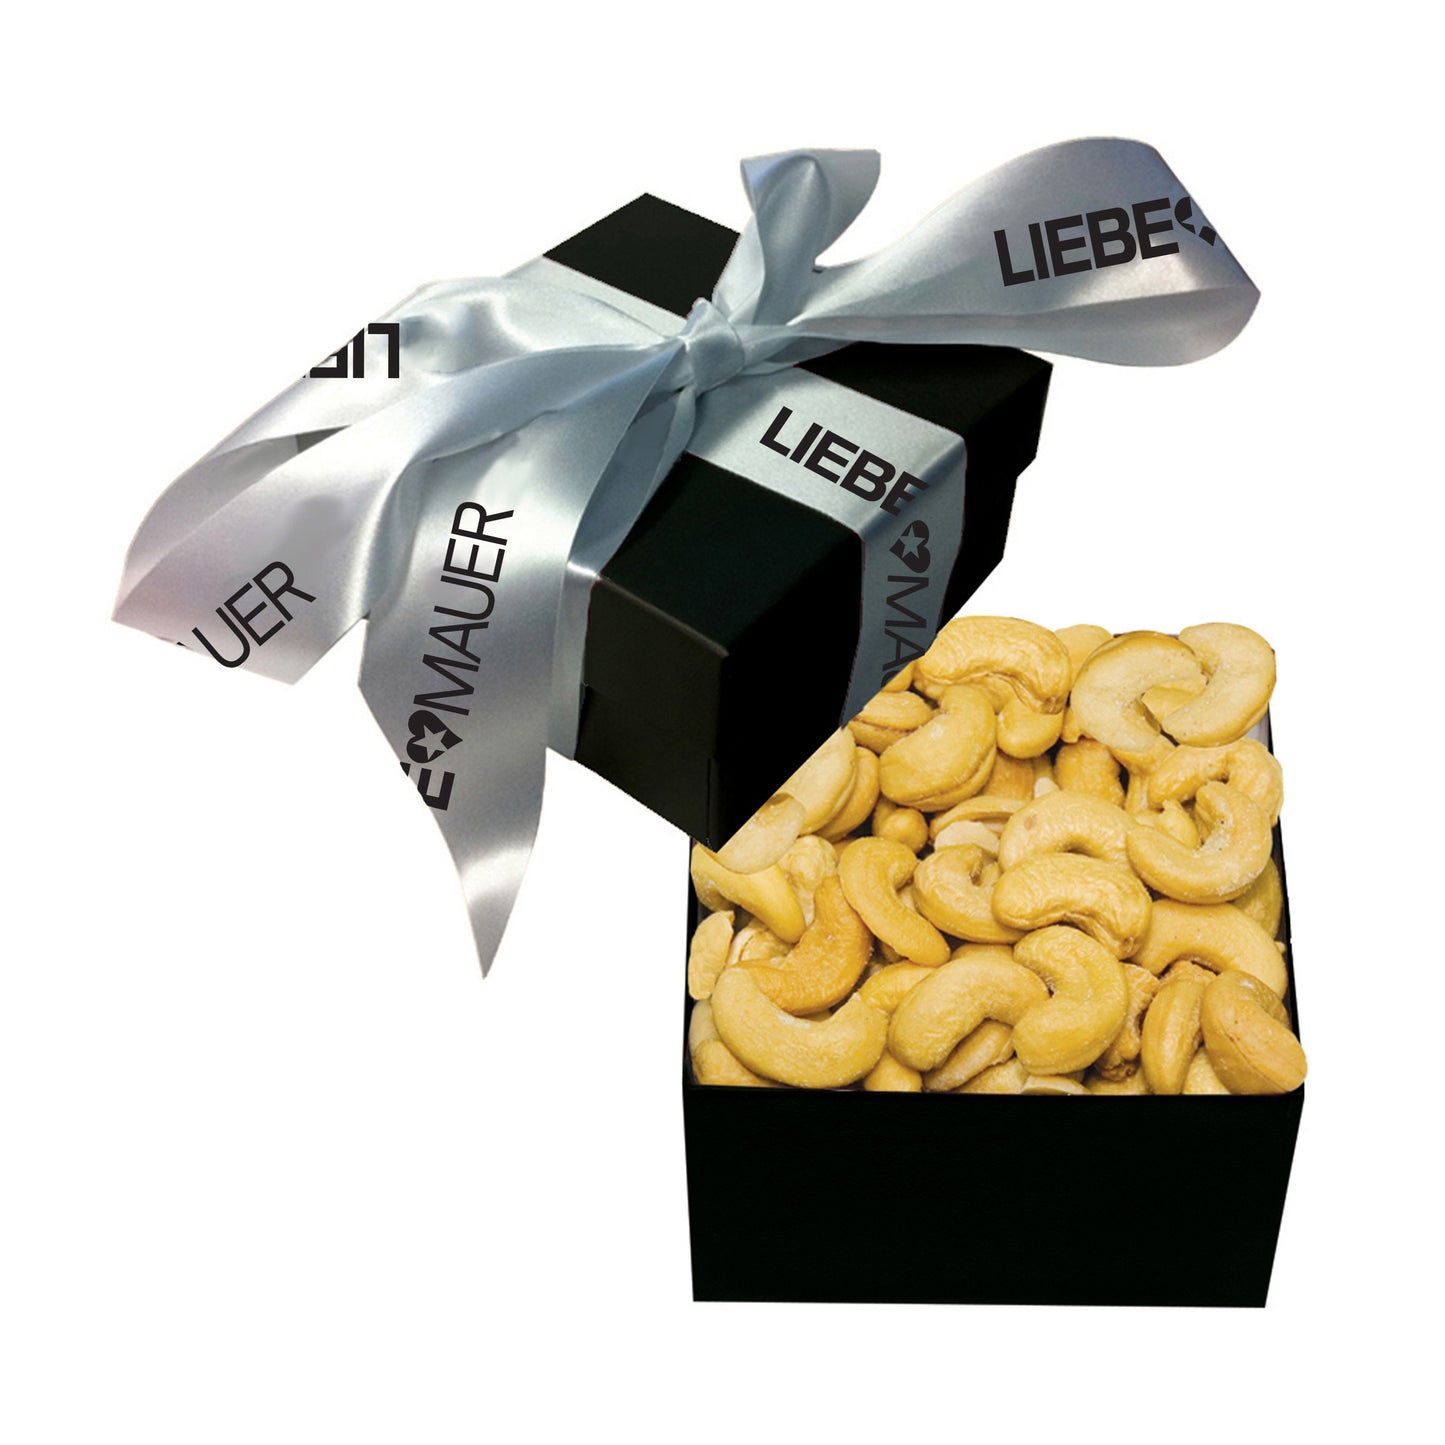 50 CHOCOLATE AND CARAMEL TURTLES OR PLAIN CASHEWS WITH YOUR LOGO